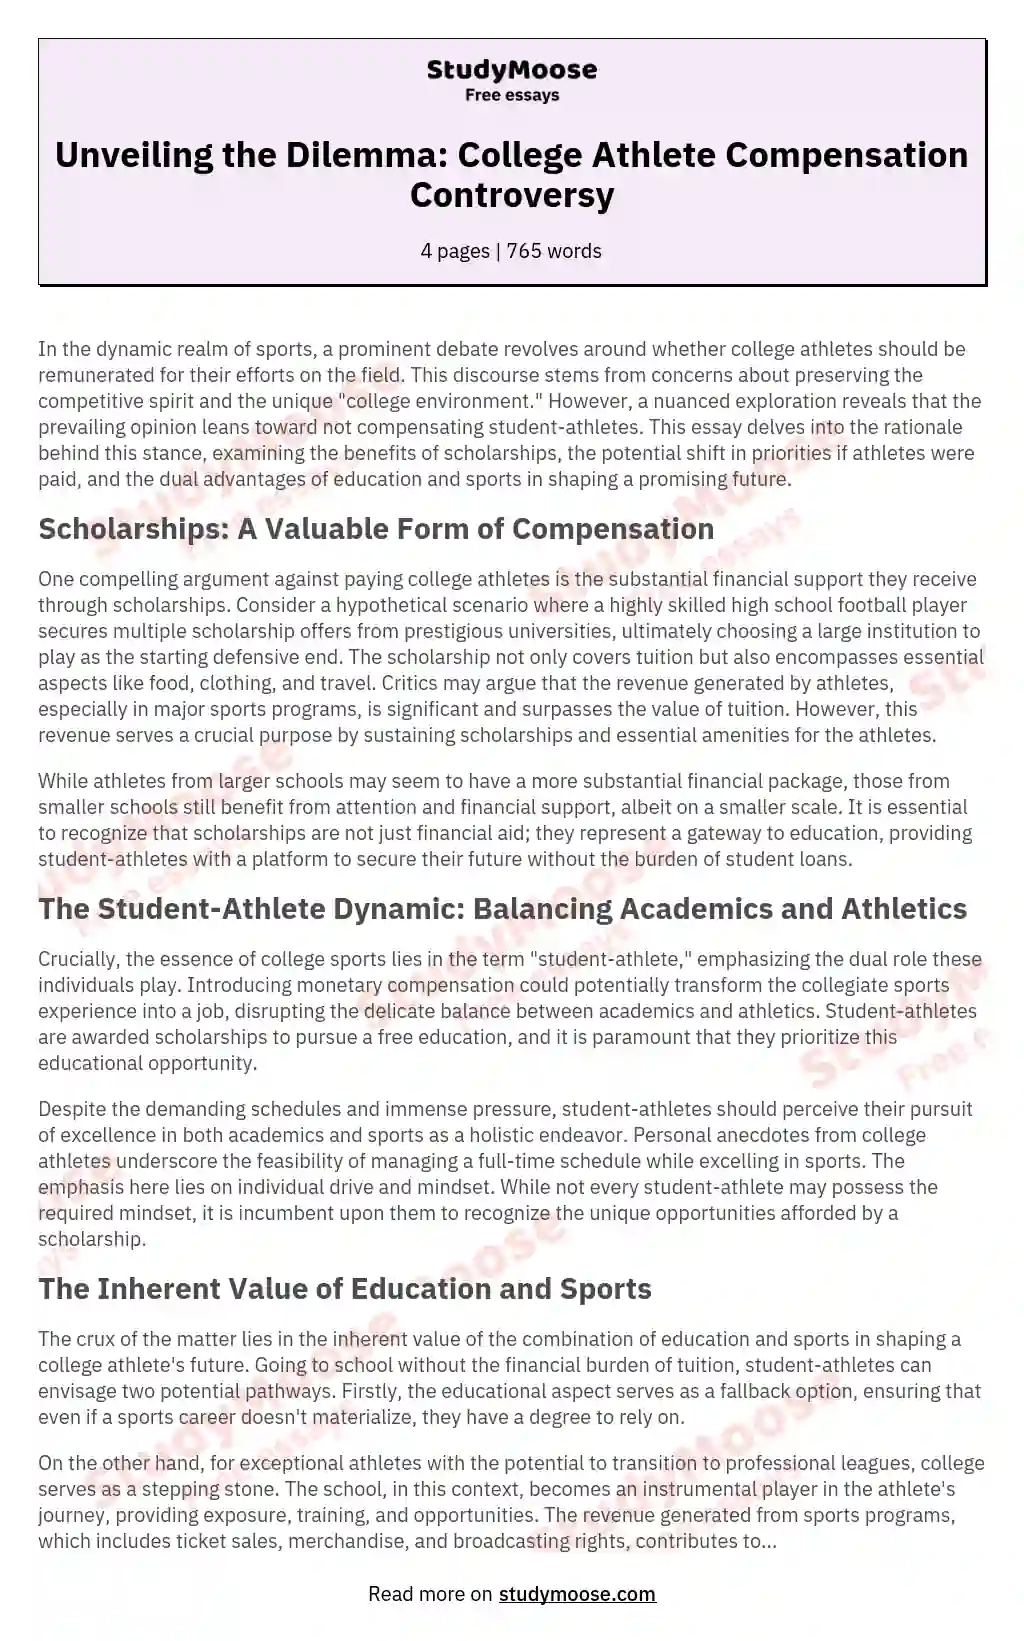 college athletes should be paid persuasive essay